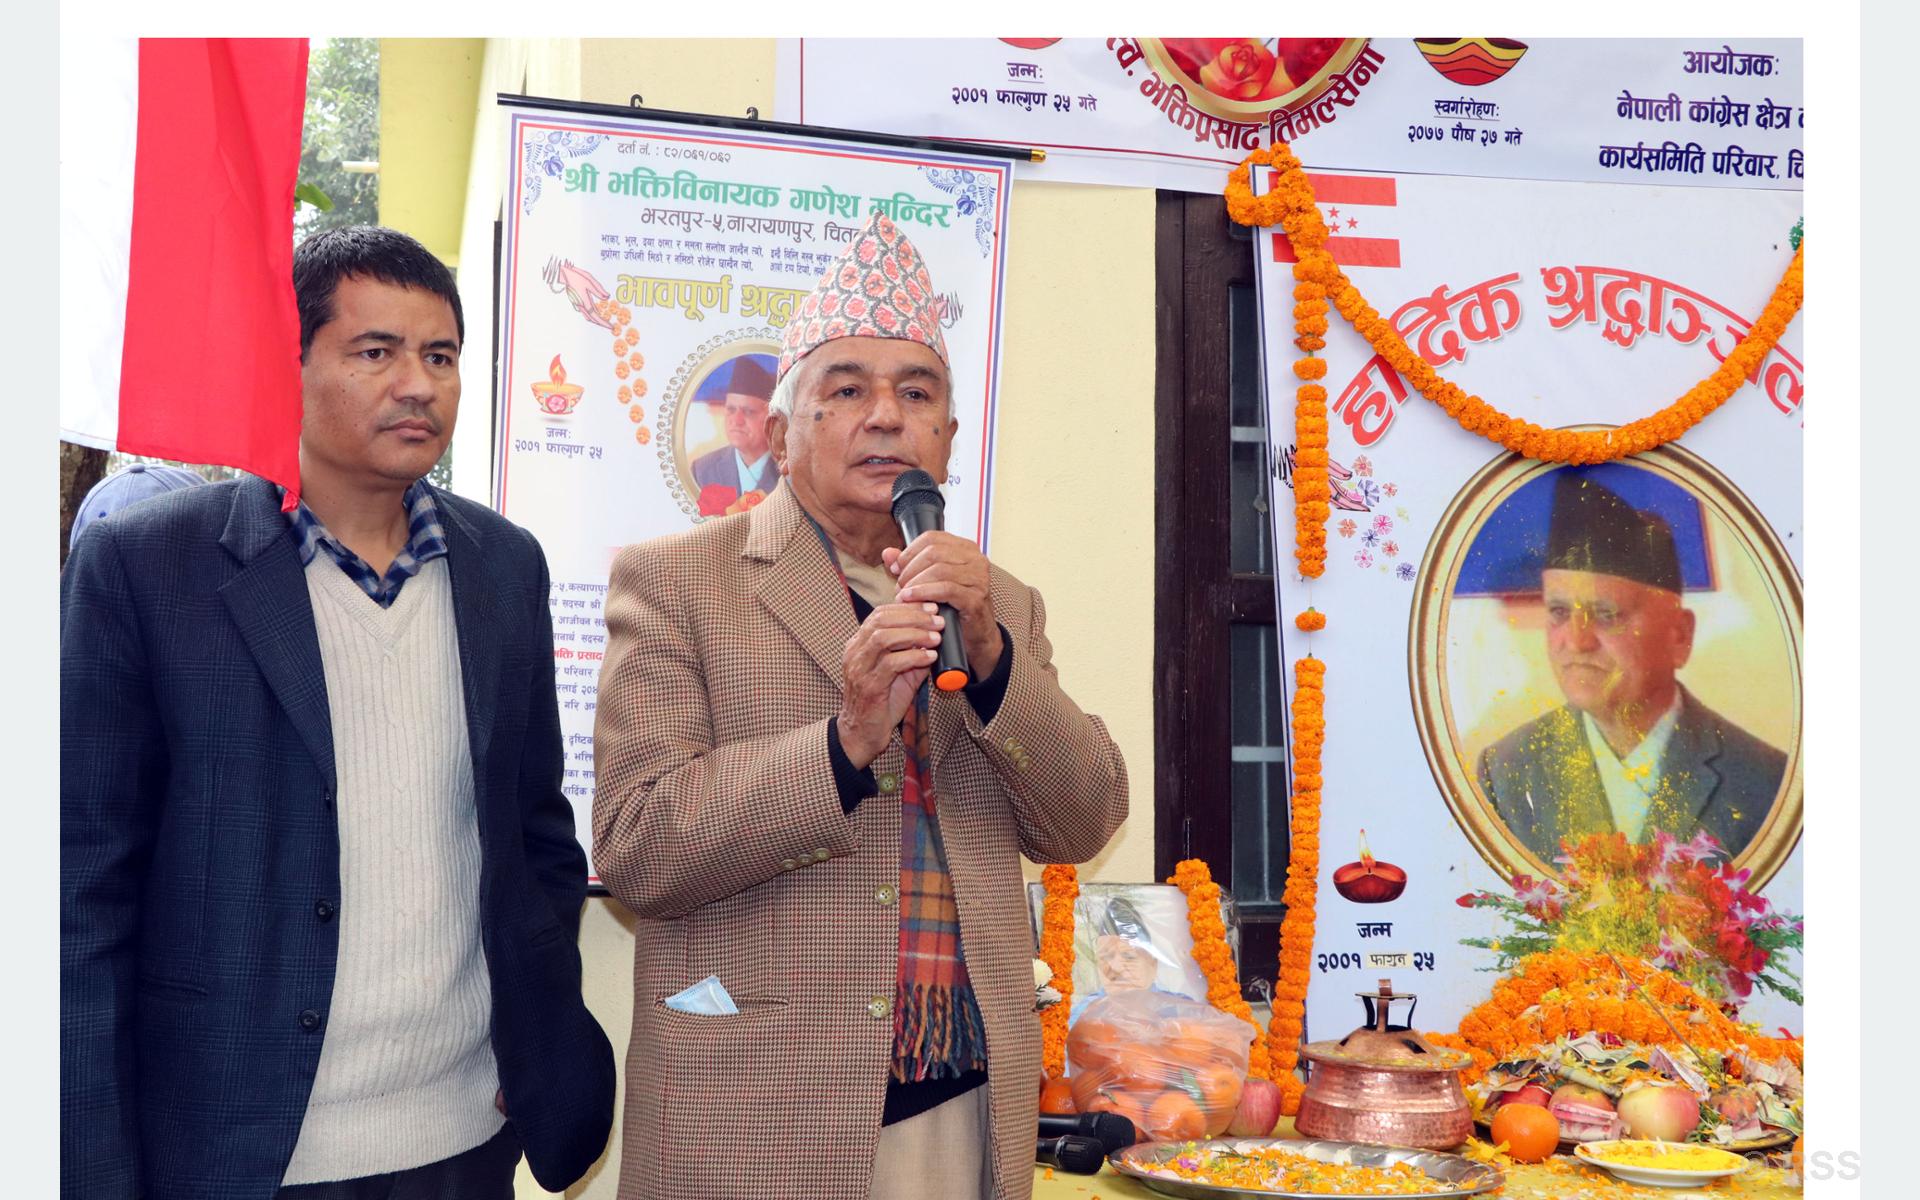 nc-leader-poudel-emphasises-unity-among-all-to-safeguard-democracy